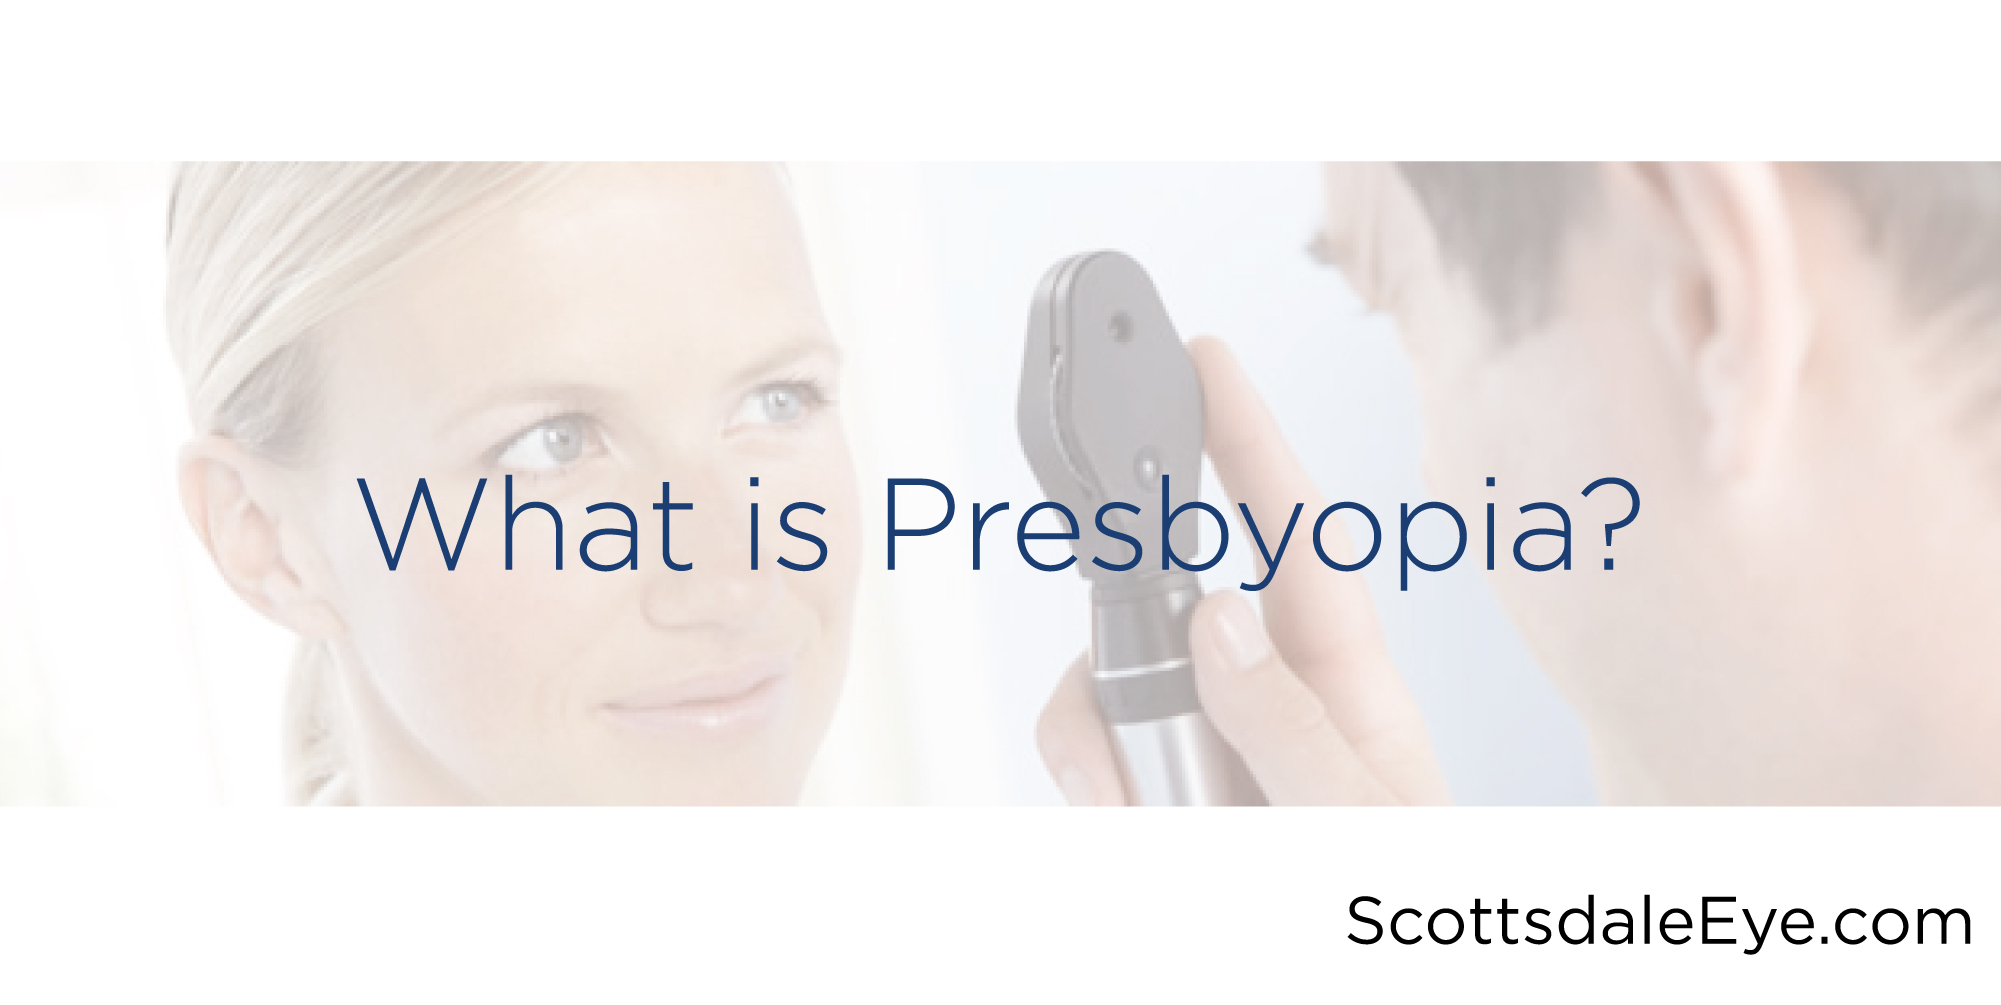 Presbyopia, breaking down the problems associated with the aging eye